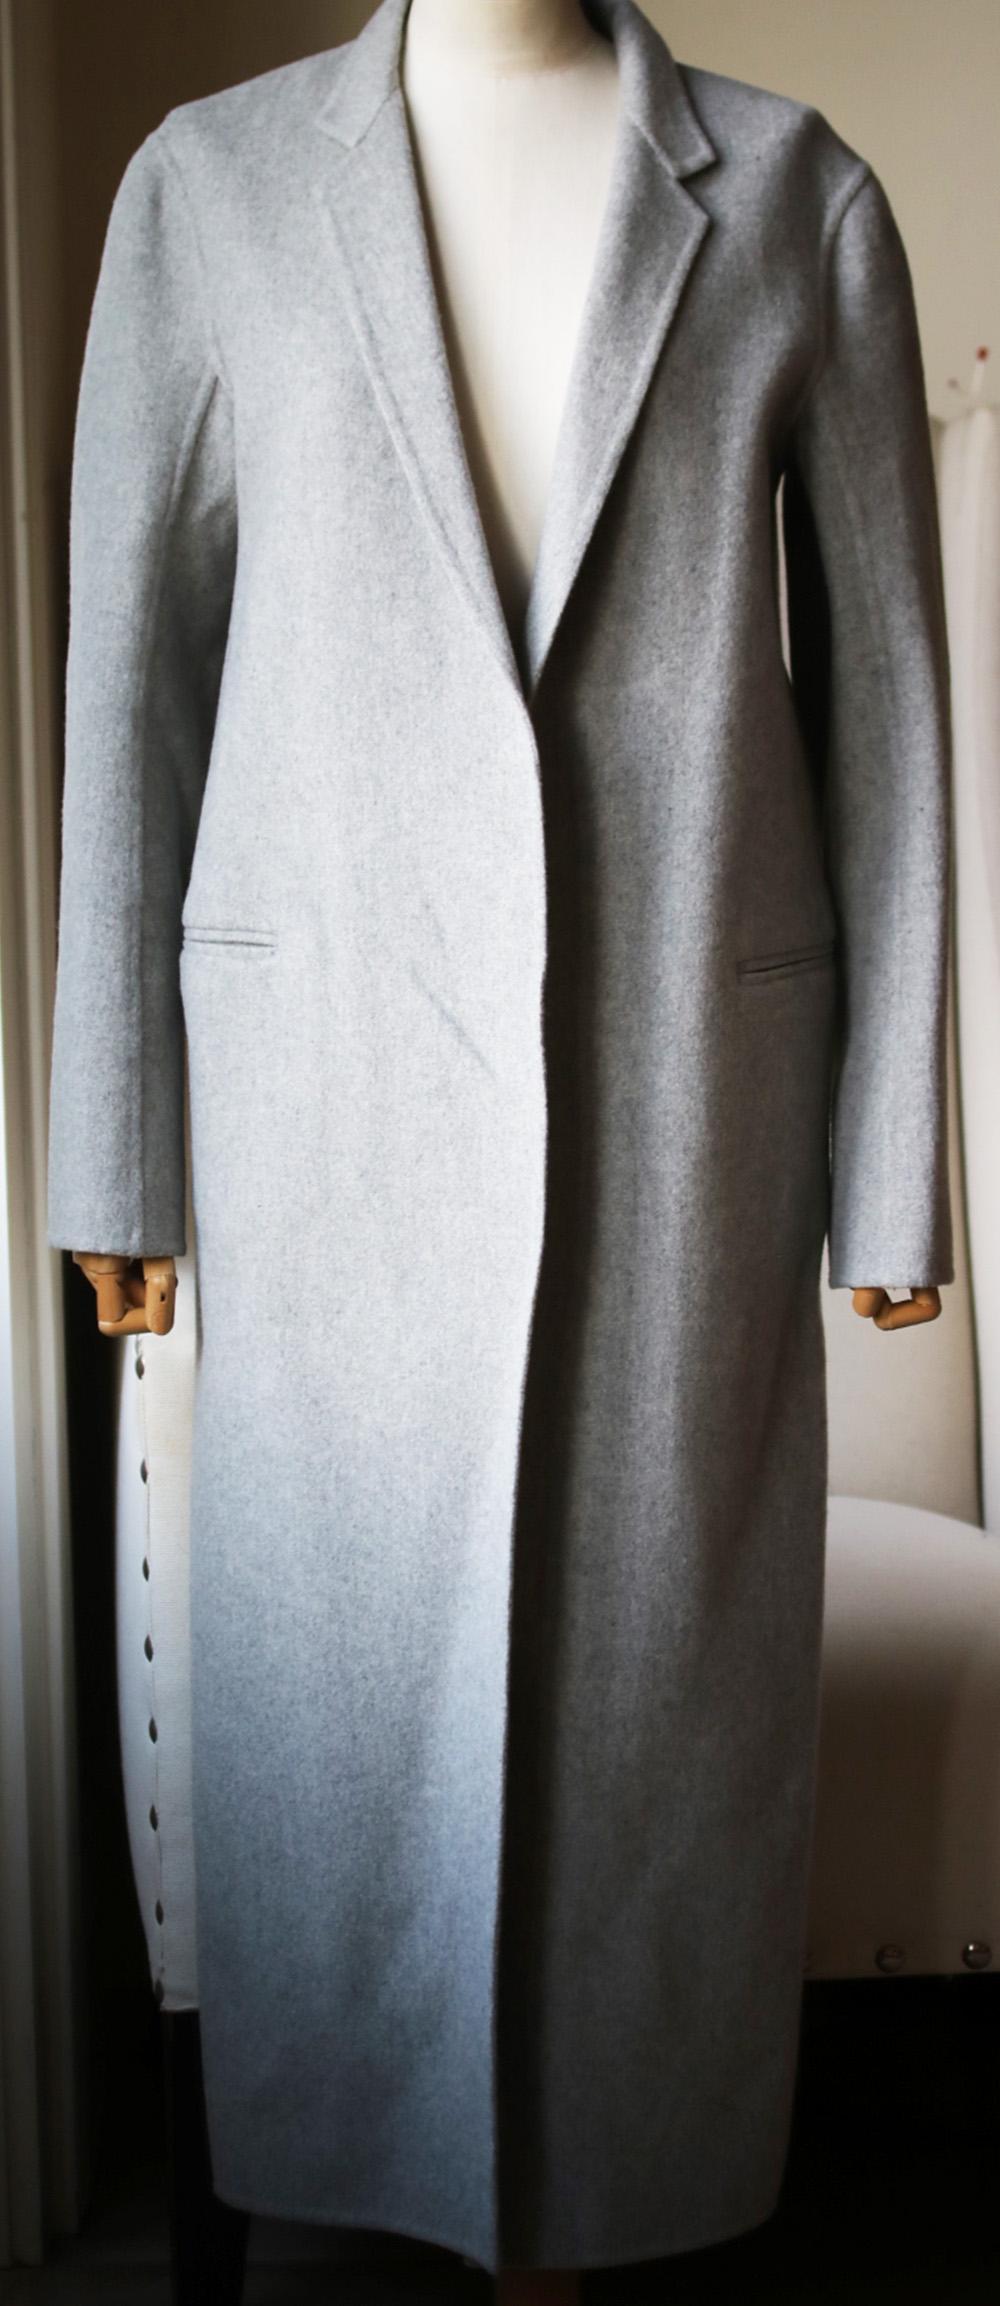 This design has a long hem that falls below the knee and a vent at the back for ease of movement. Grey cashmere and wool-blend. Slips on. 50% Cashmere, 50% wool. Lining: 57% viscose, 43% polyamide.

Size: US 8 (UK 12, FR 40, IT 44)

Condition: As